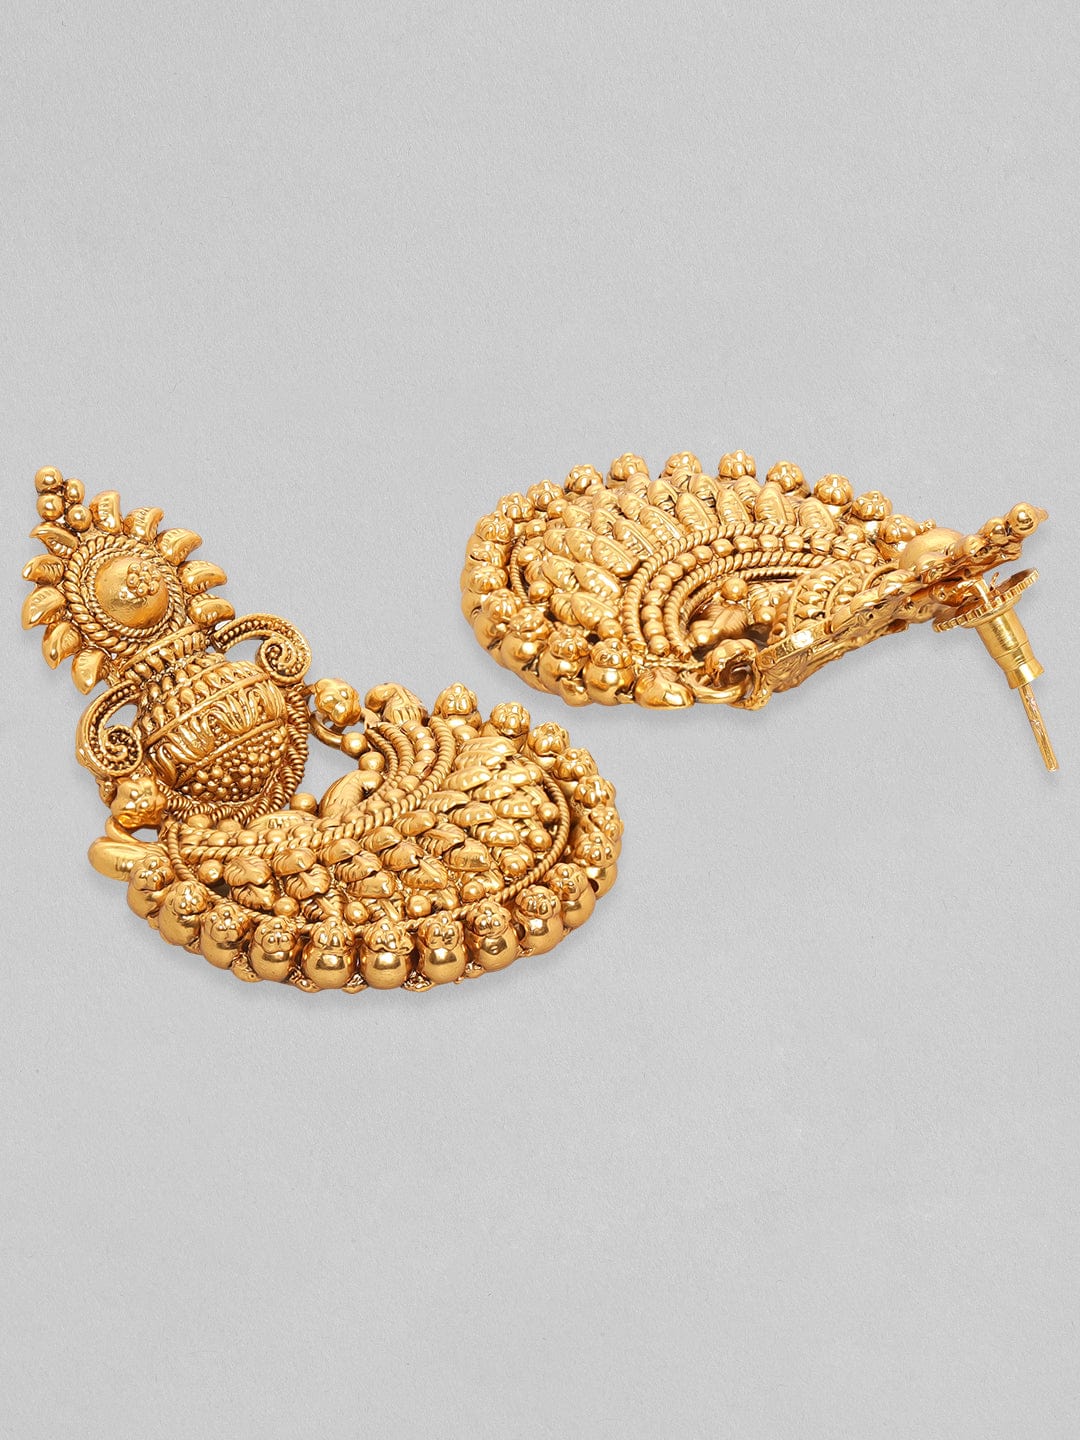 Rubans Luxury 22K Pure Gold Plated With Antique Detail Temple Dangle Earring Earrings